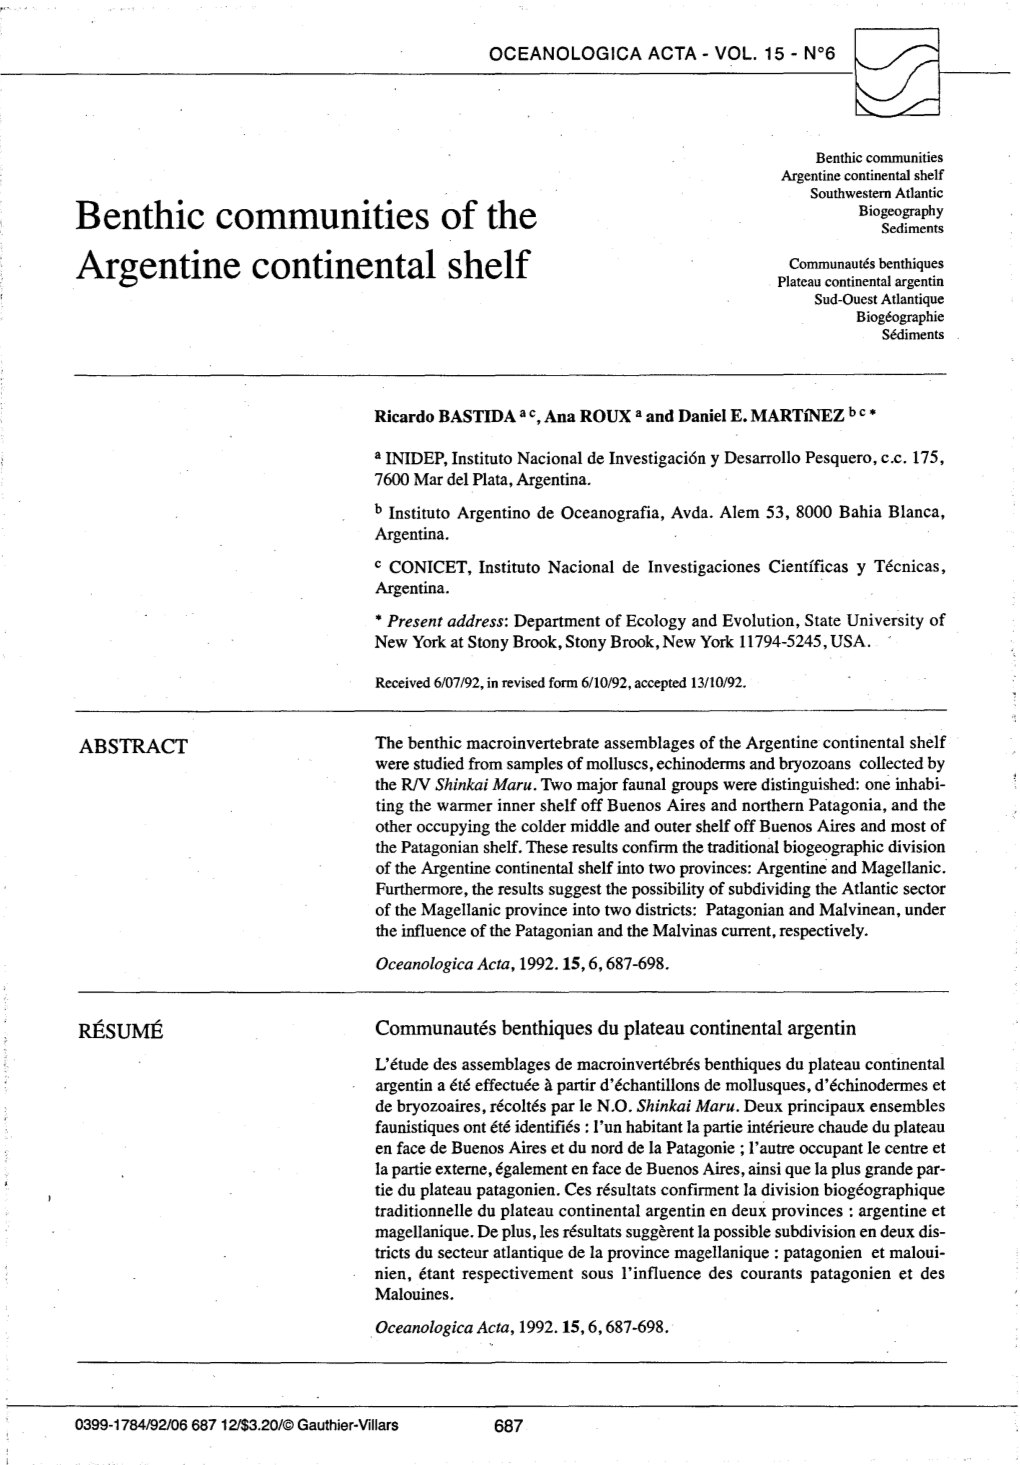 Benthic Communities of the Argentine Continental Shelf